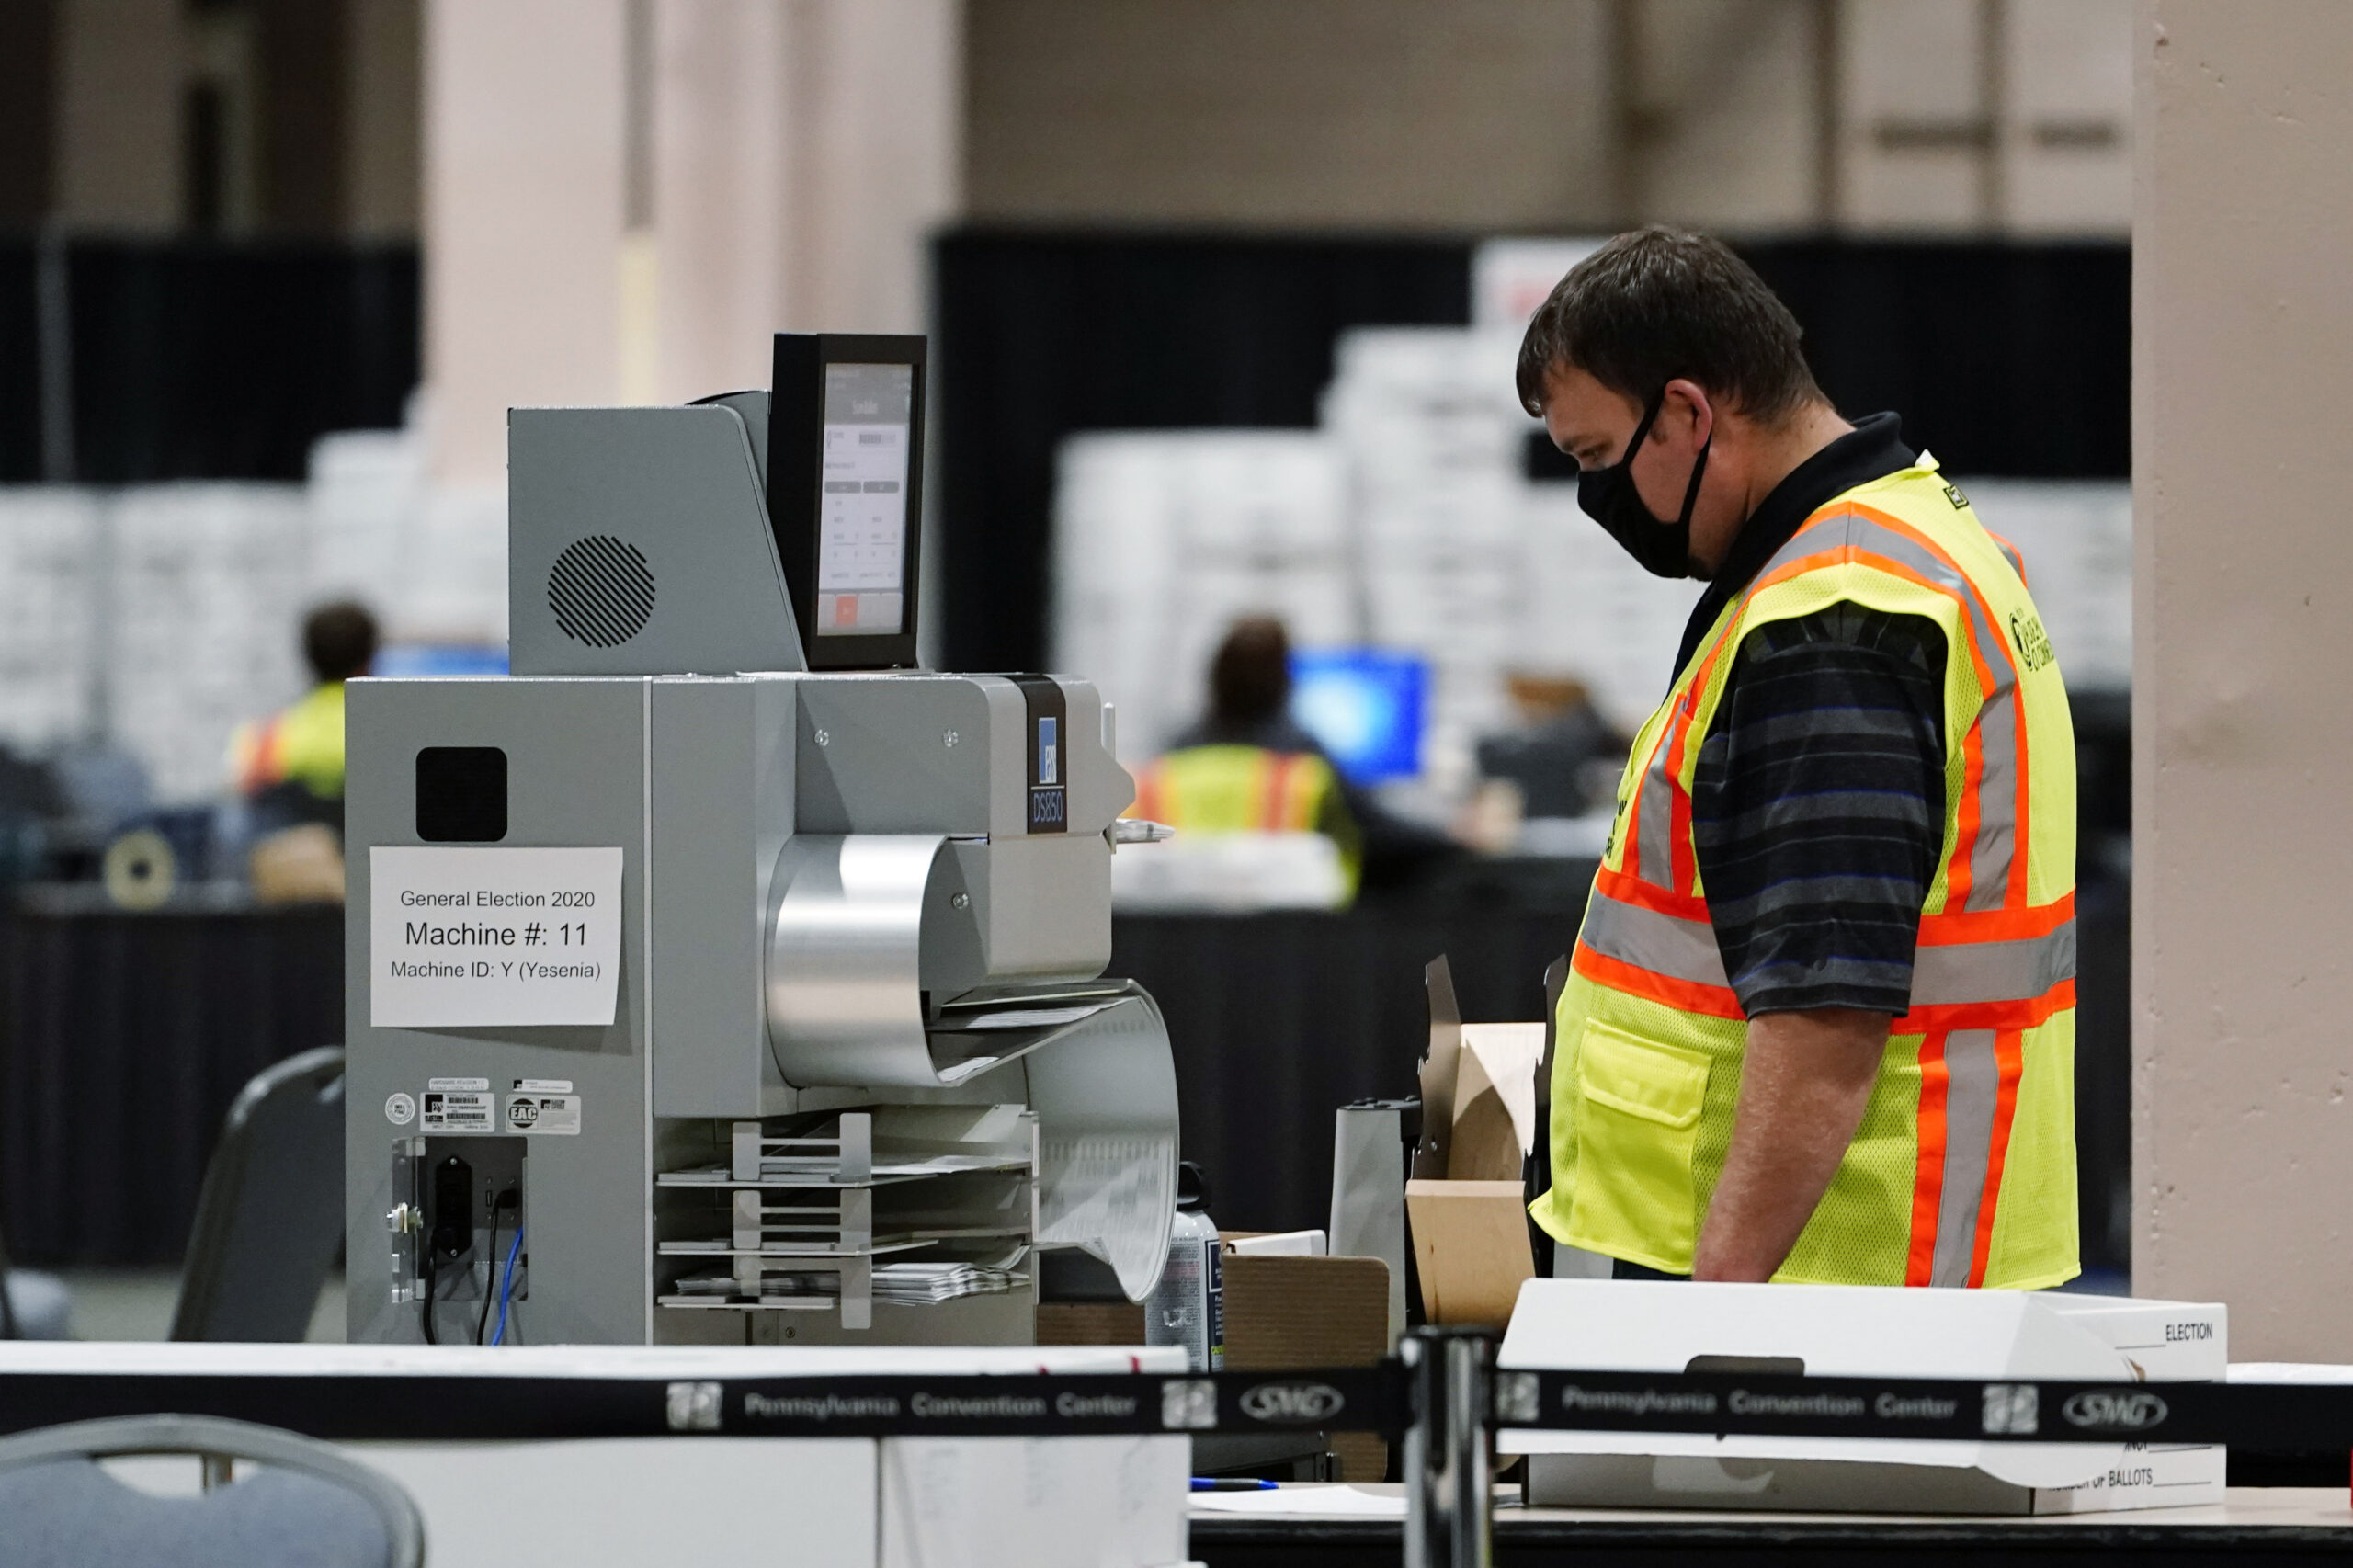 A Philadelphia election worker scans ballots for the 2020 general election in the United States at the Pennsylvania Convention Center, Tuesday, Nov. 3, 2020, in Philadelphia. (AP Photo/Matt Slocum)